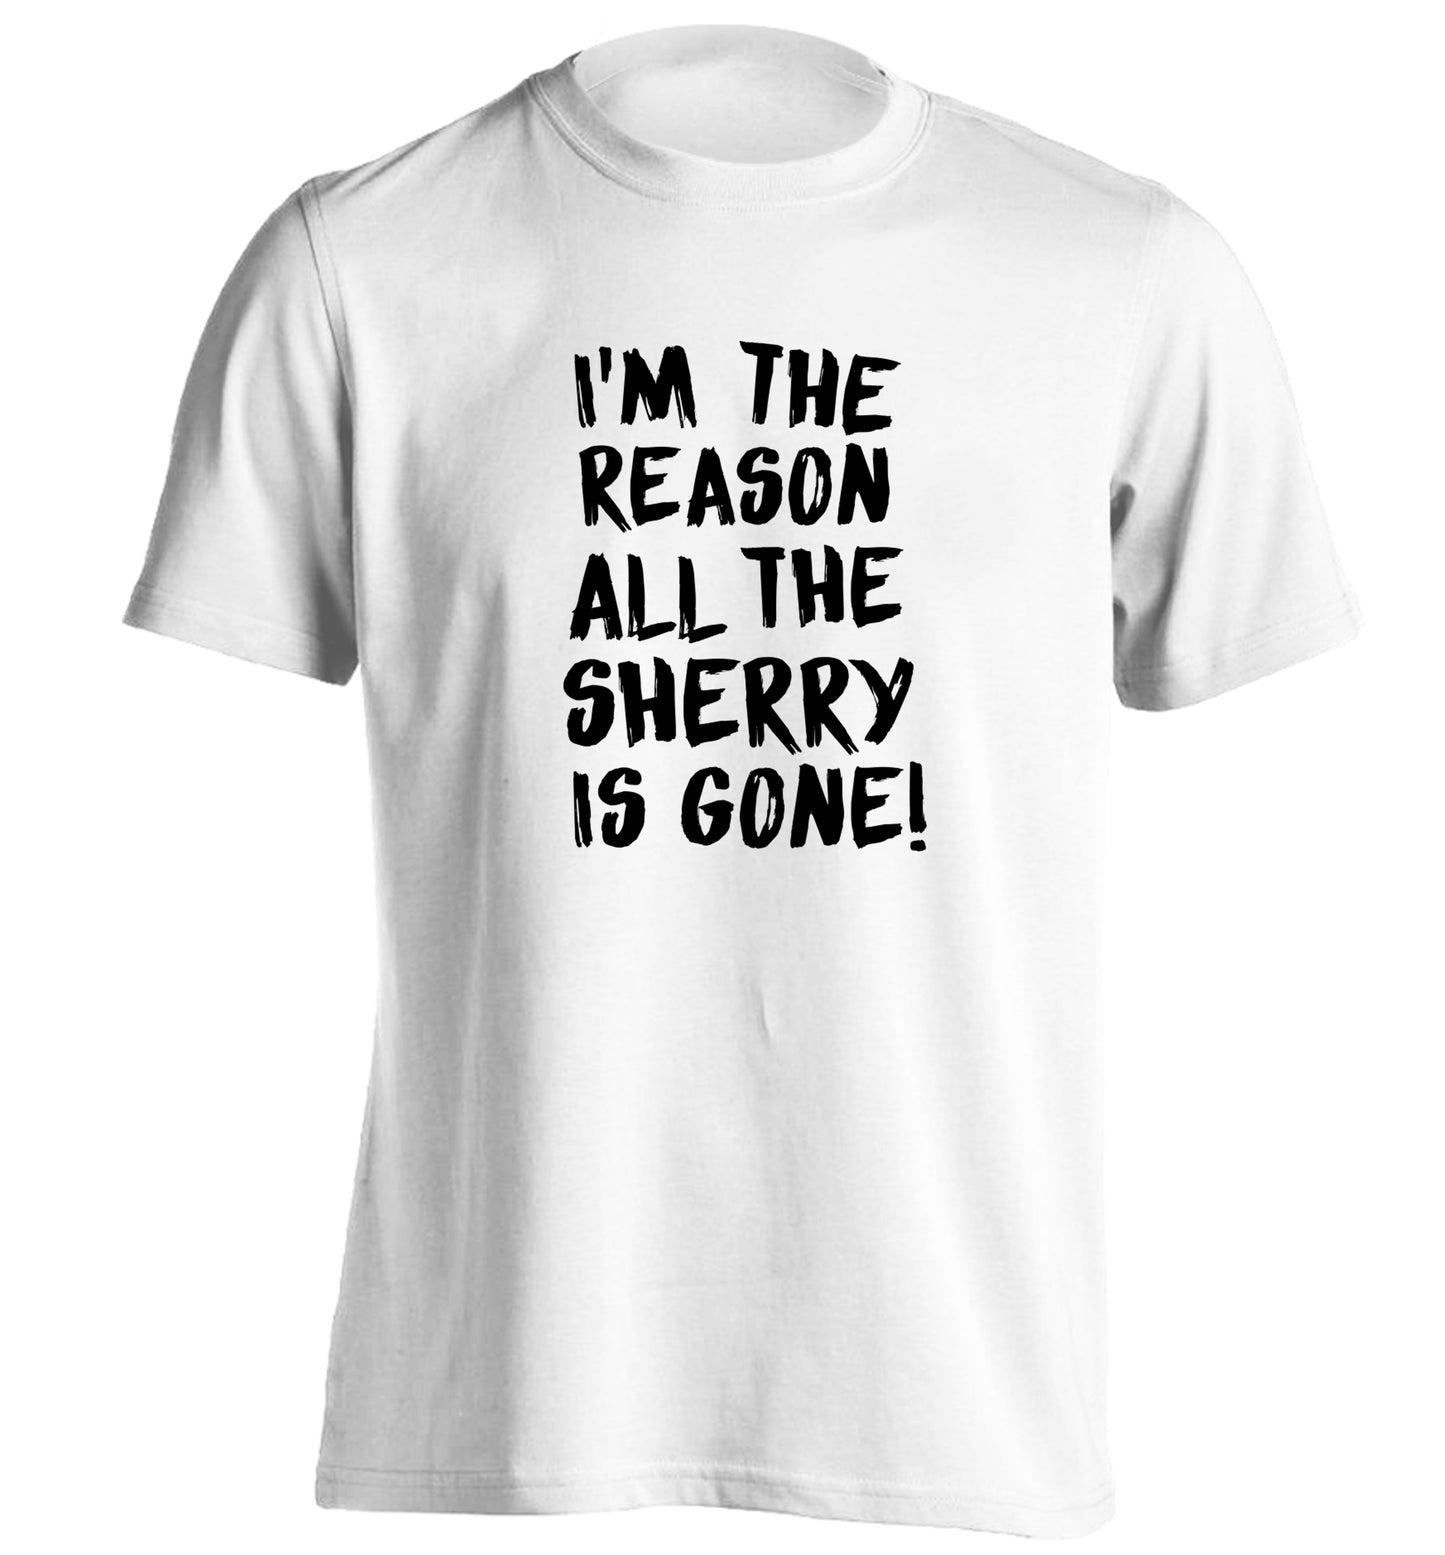 I'm the reason all the sherry is gone adults unisex white Tshirt 2XL